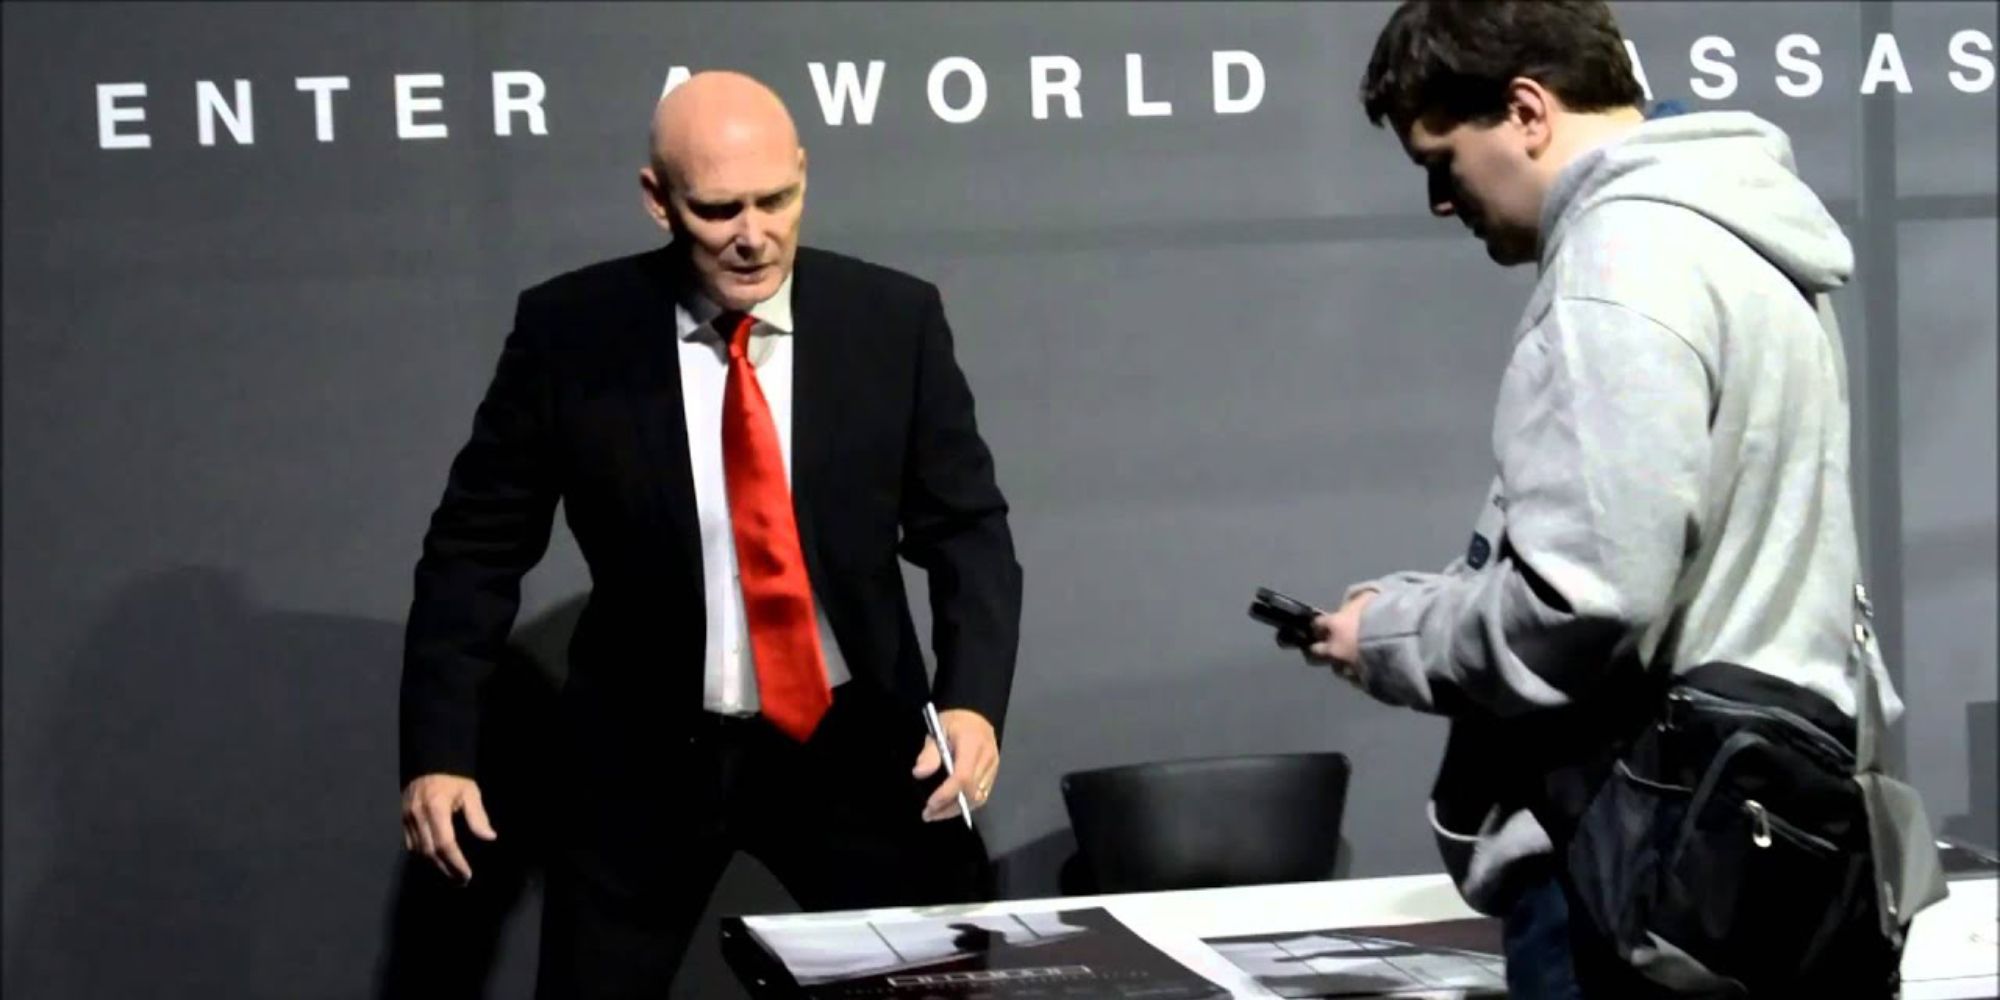 david bateson dressed as agent 47 and meeting fans